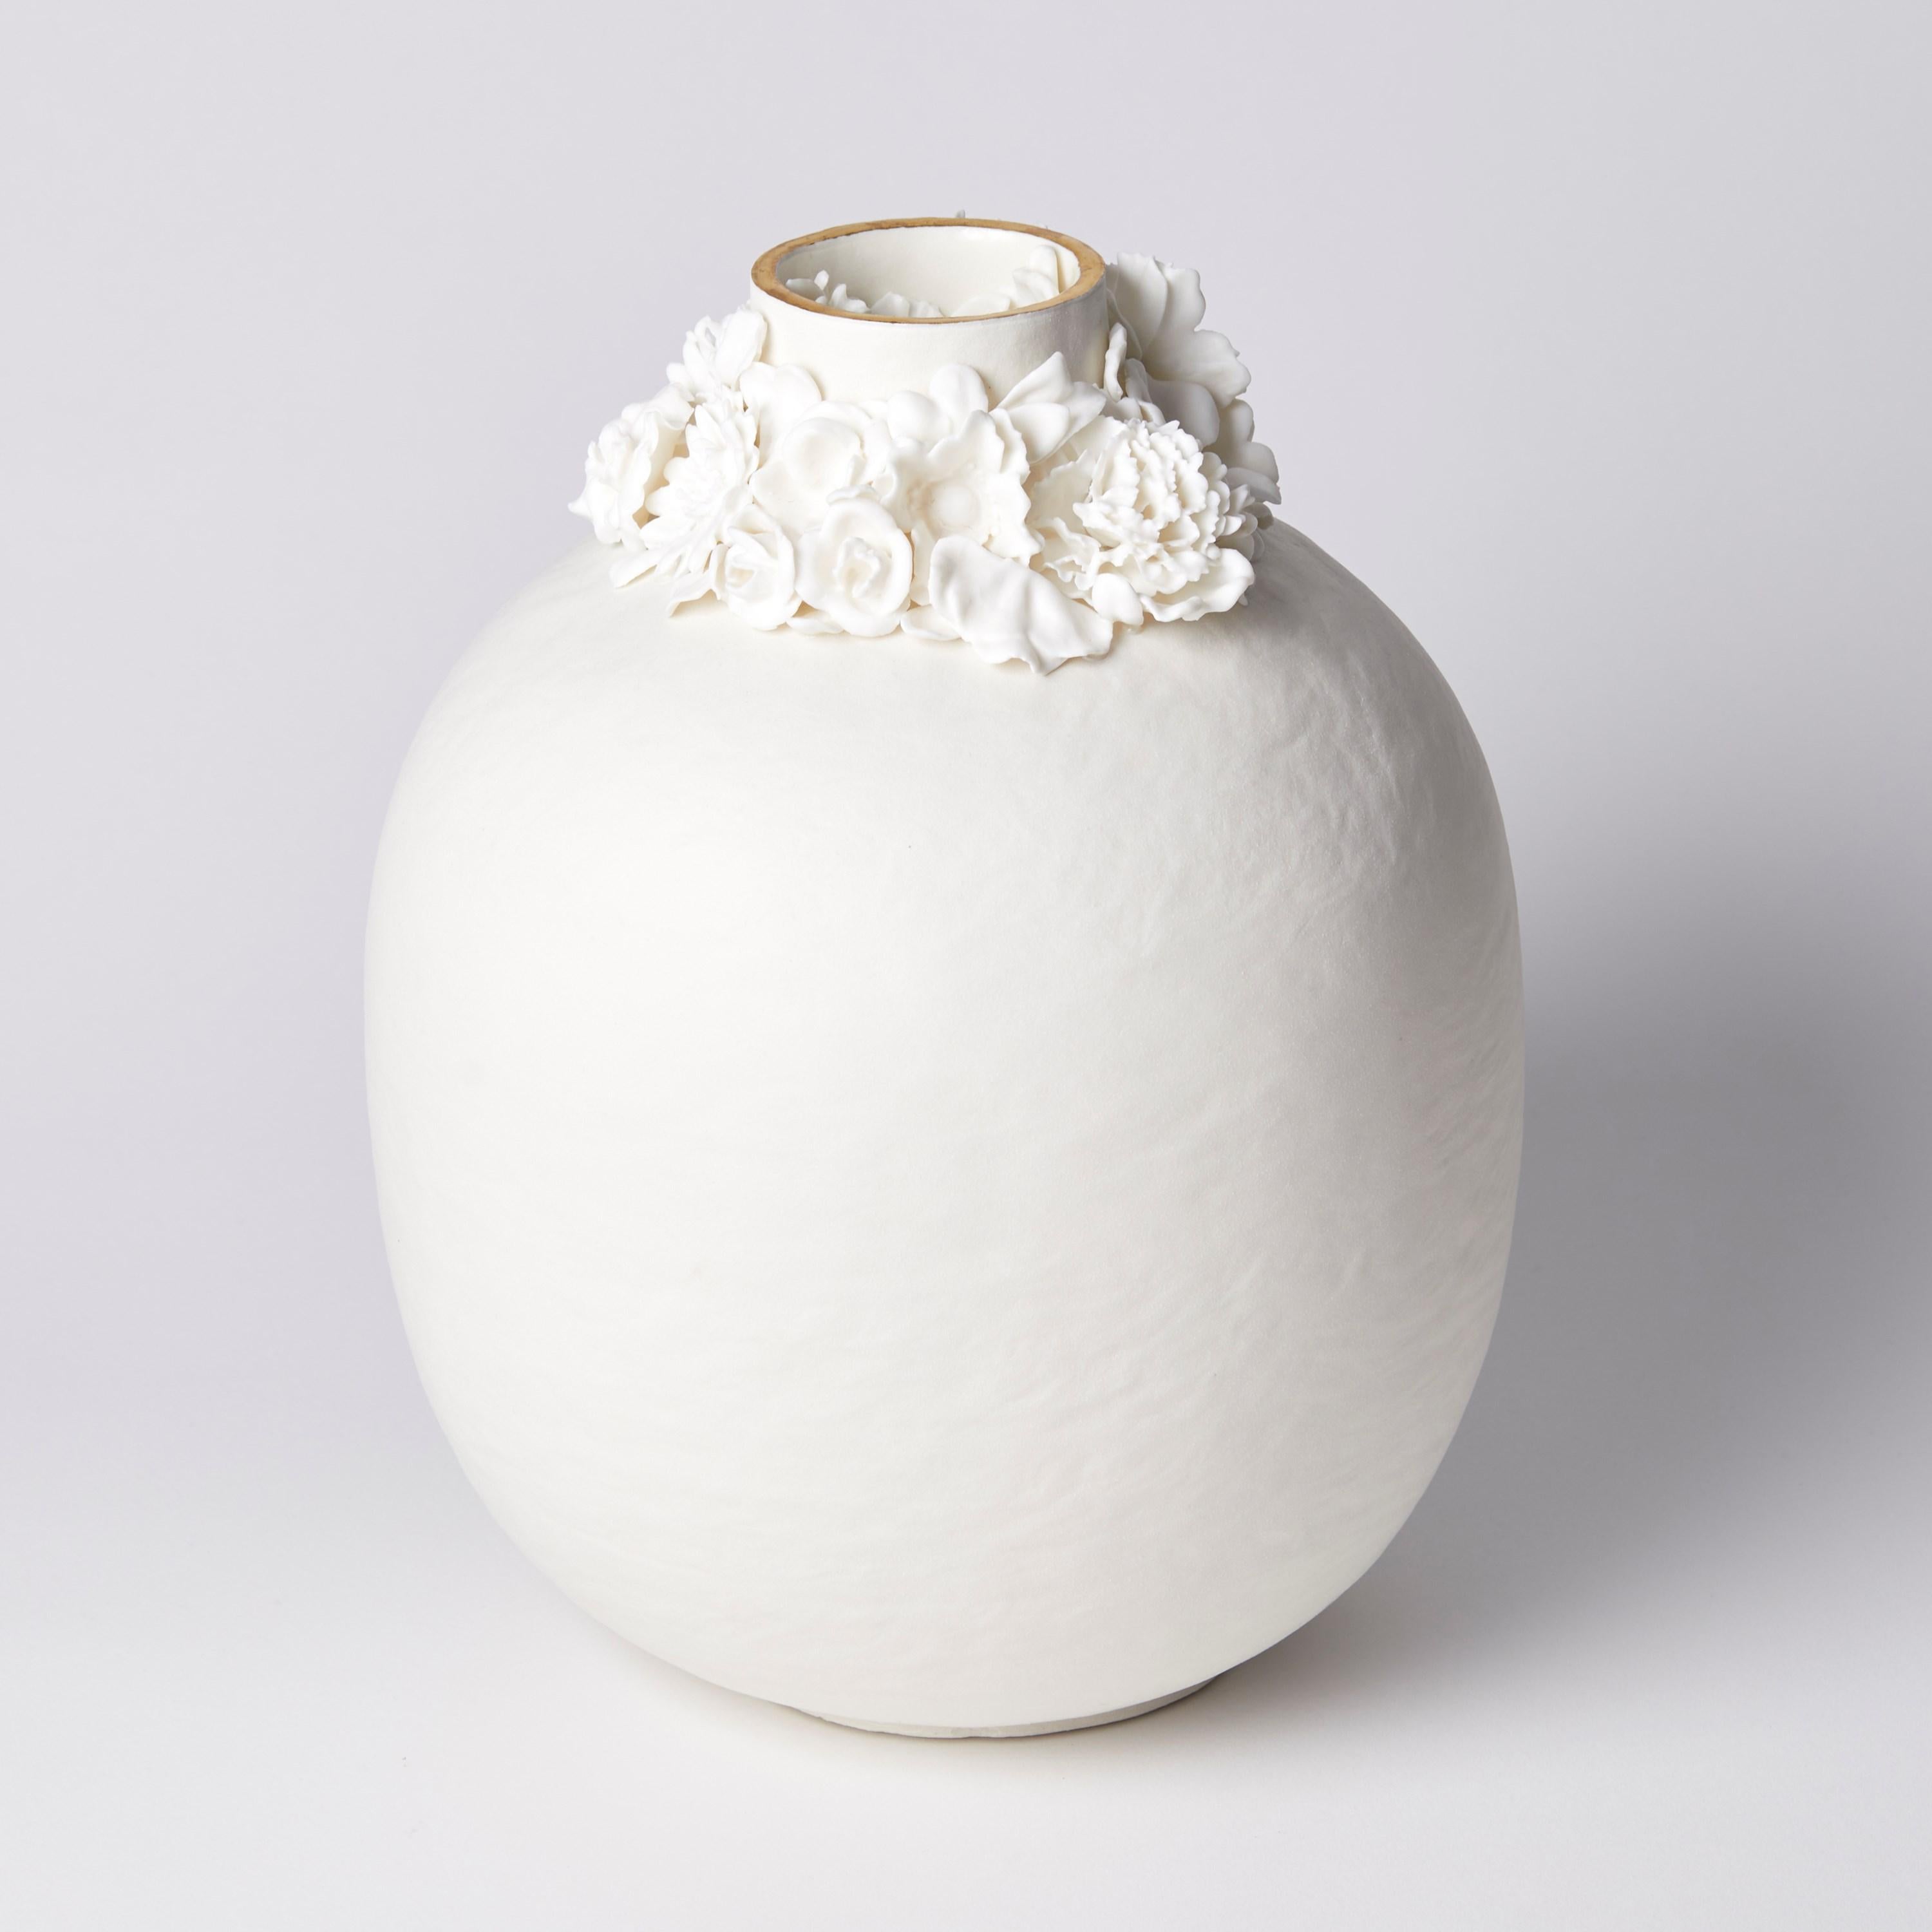 'Forget Me Not VII' is a unique porcelain sculptural vessel by the British artist, Amy Hughes.

Originally from West Yorkshire, Amy Hughes lives and works in London. She shares a studio with 10 of her former students from the Royal College of Art,